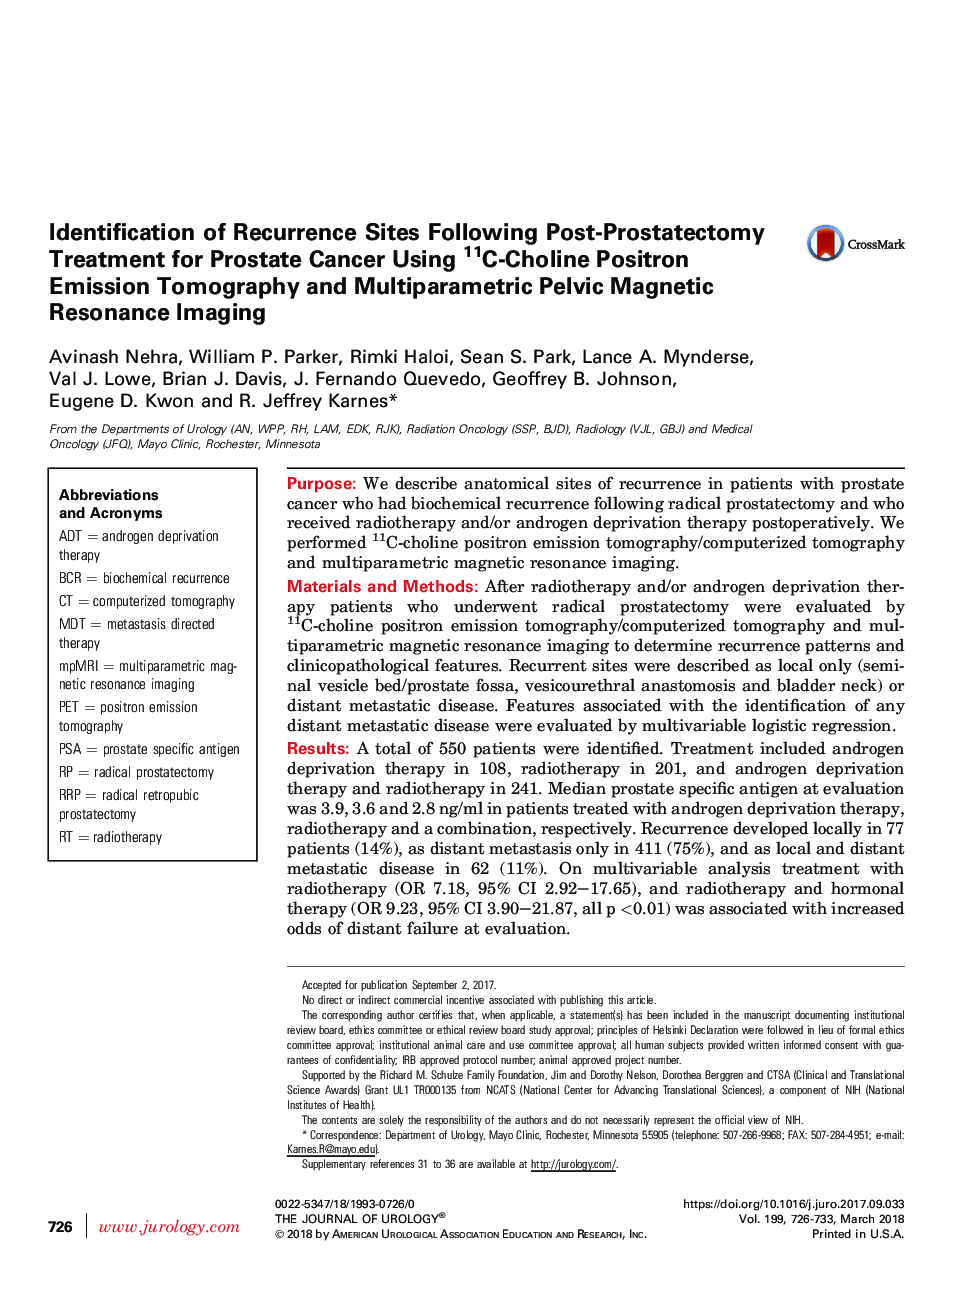 Identification of Recurrence Sites Following Post-Prostatectomy Treatment for Prostate Cancer Using 11C-Choline Positron Emission Tomography and Multiparametric Pelvic Magnetic Resonance Imaging